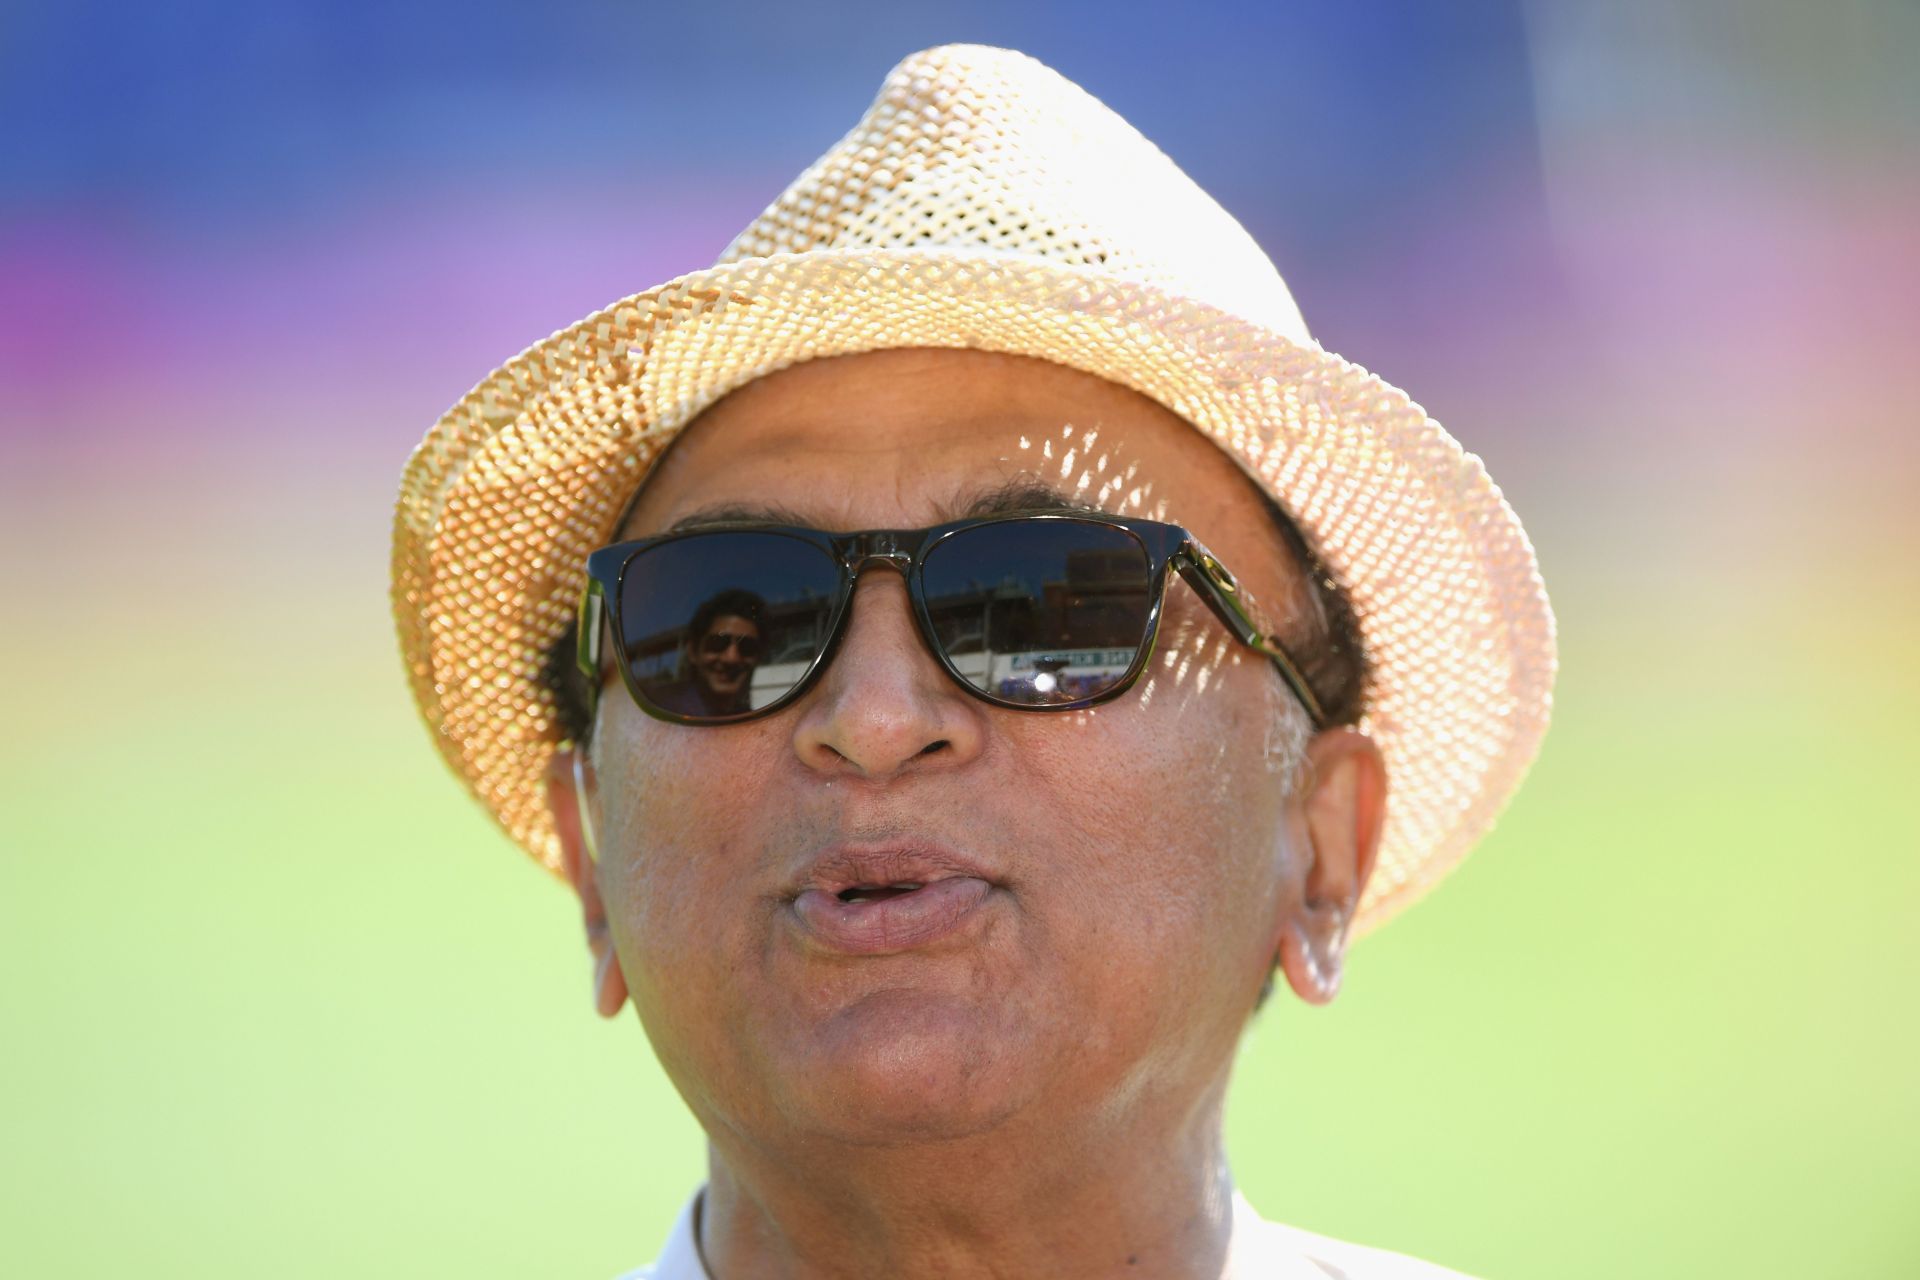 Sunil Gavaskar thinks ICC should make sure there is a level playing field for both teams. (Credit: Getty Images)